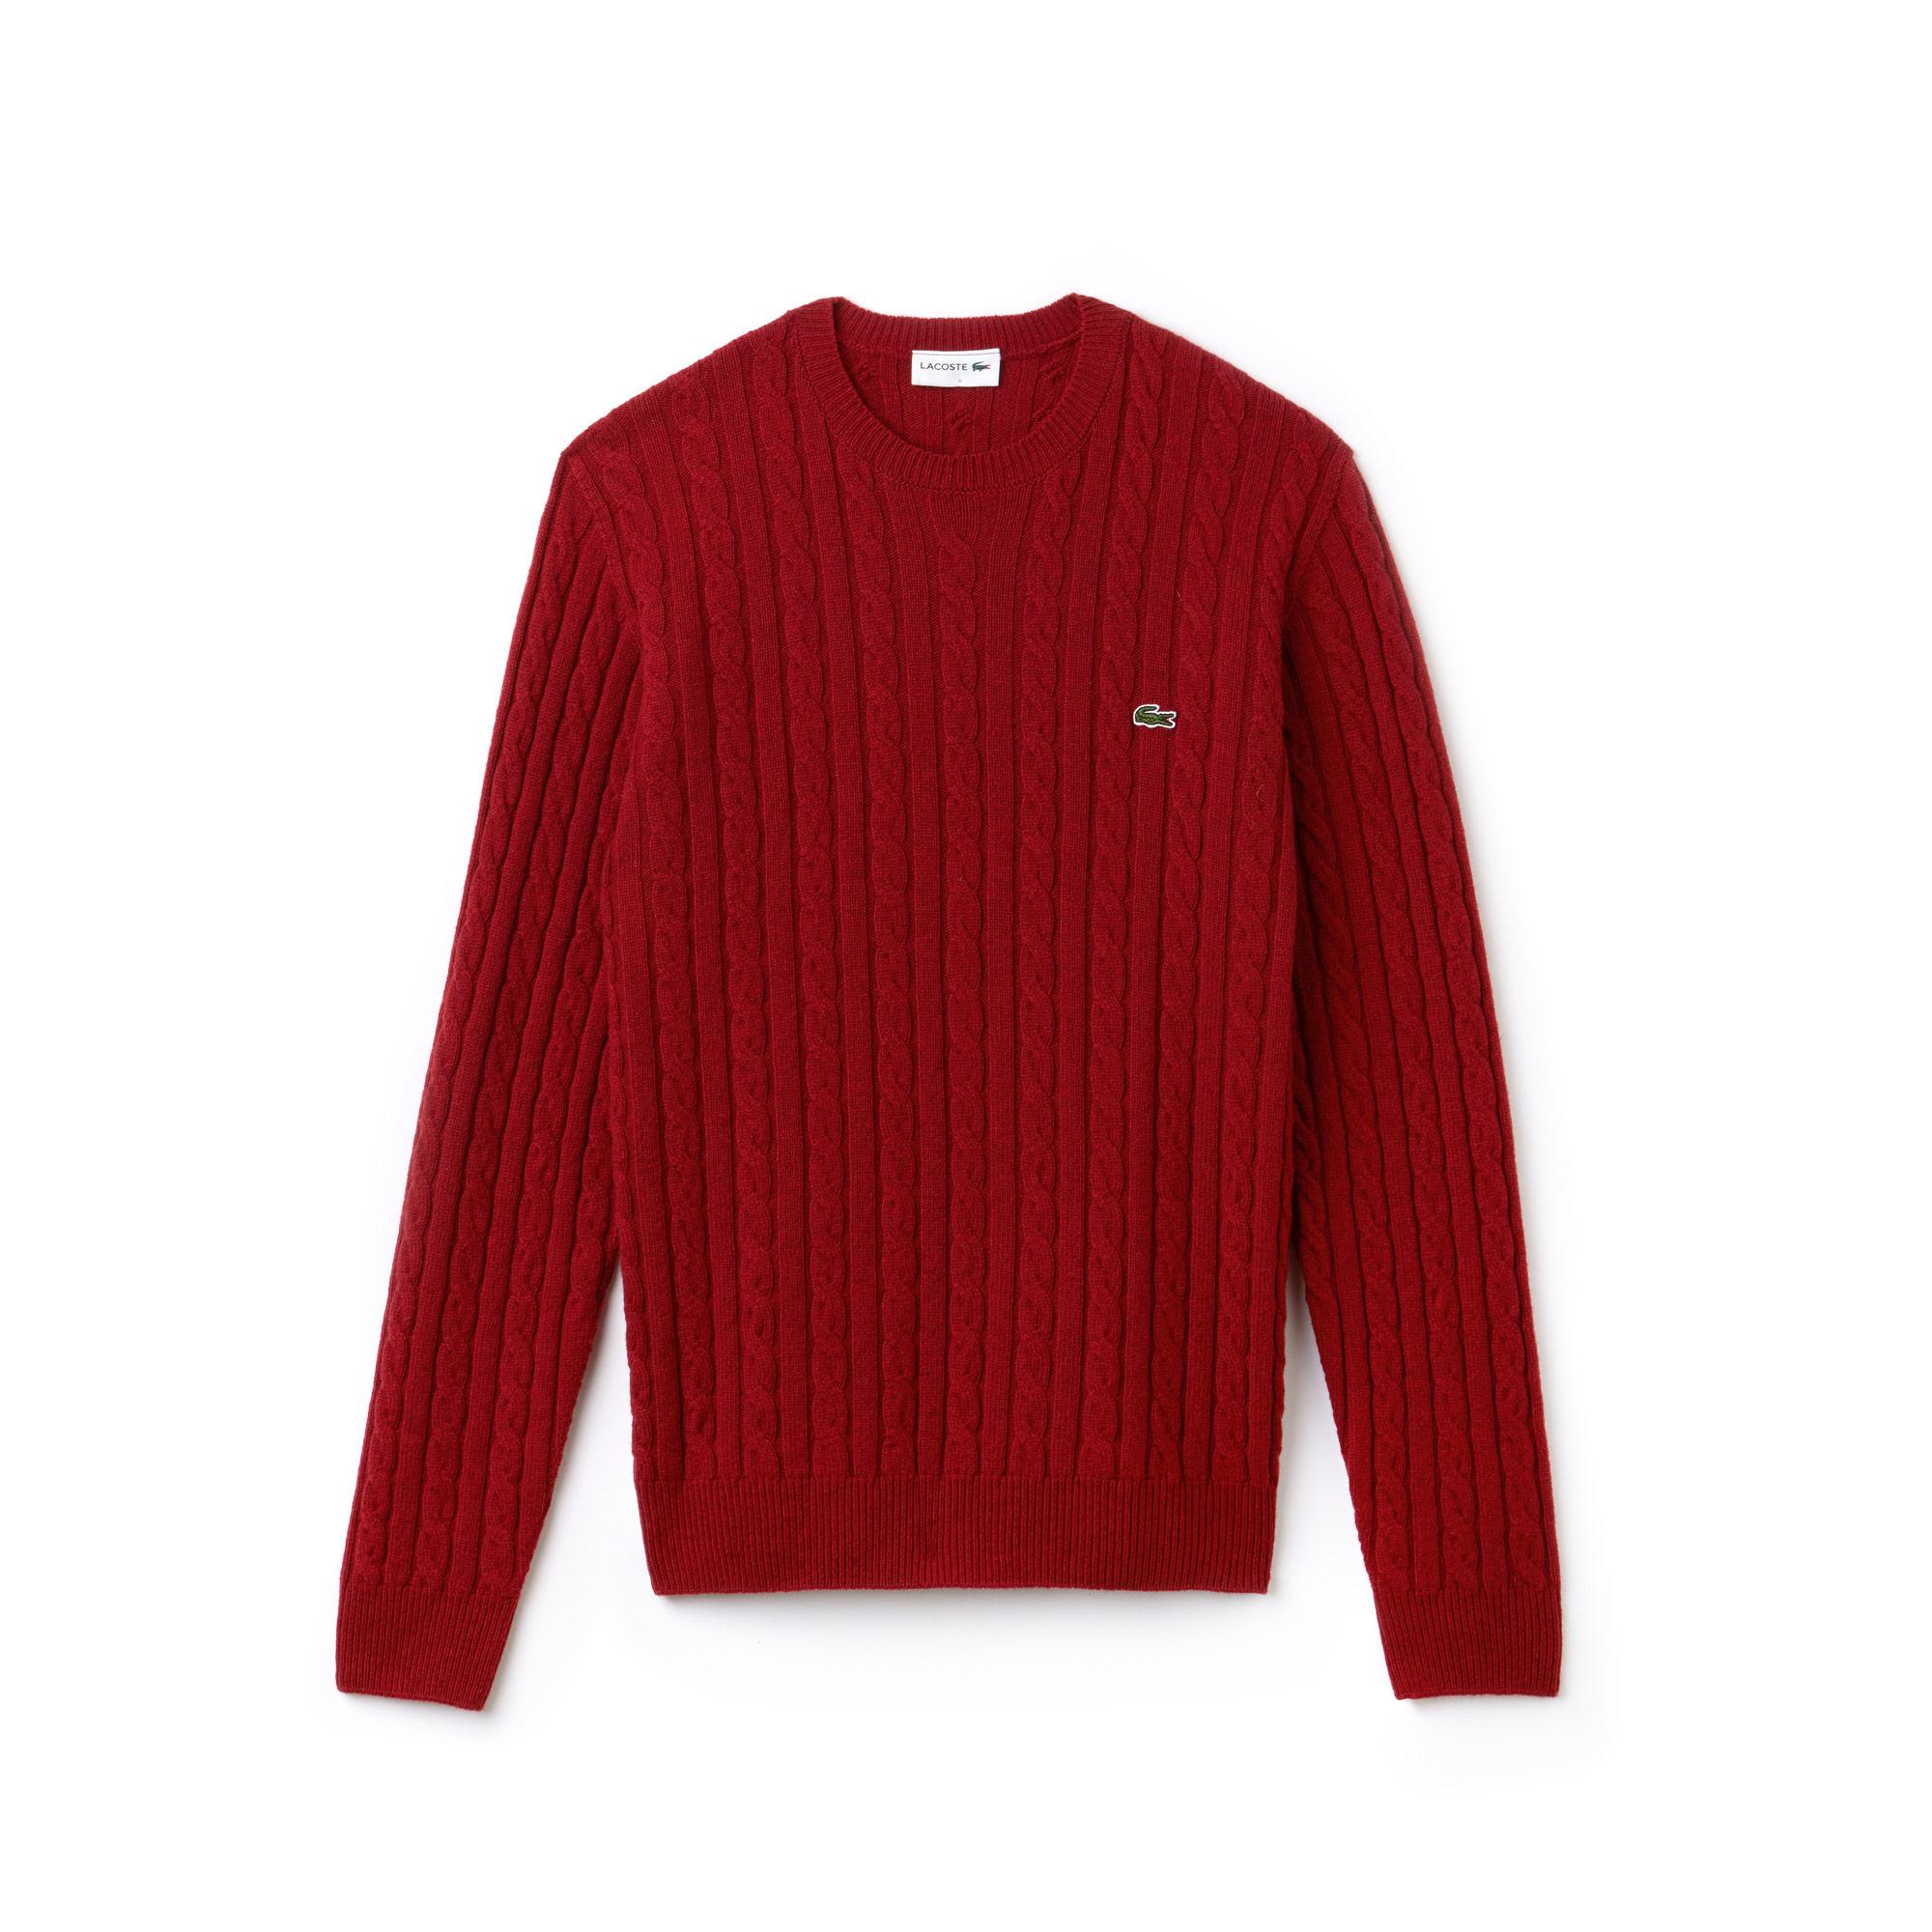 Lacoste Men's Crew Neck Wool Cable Knit 